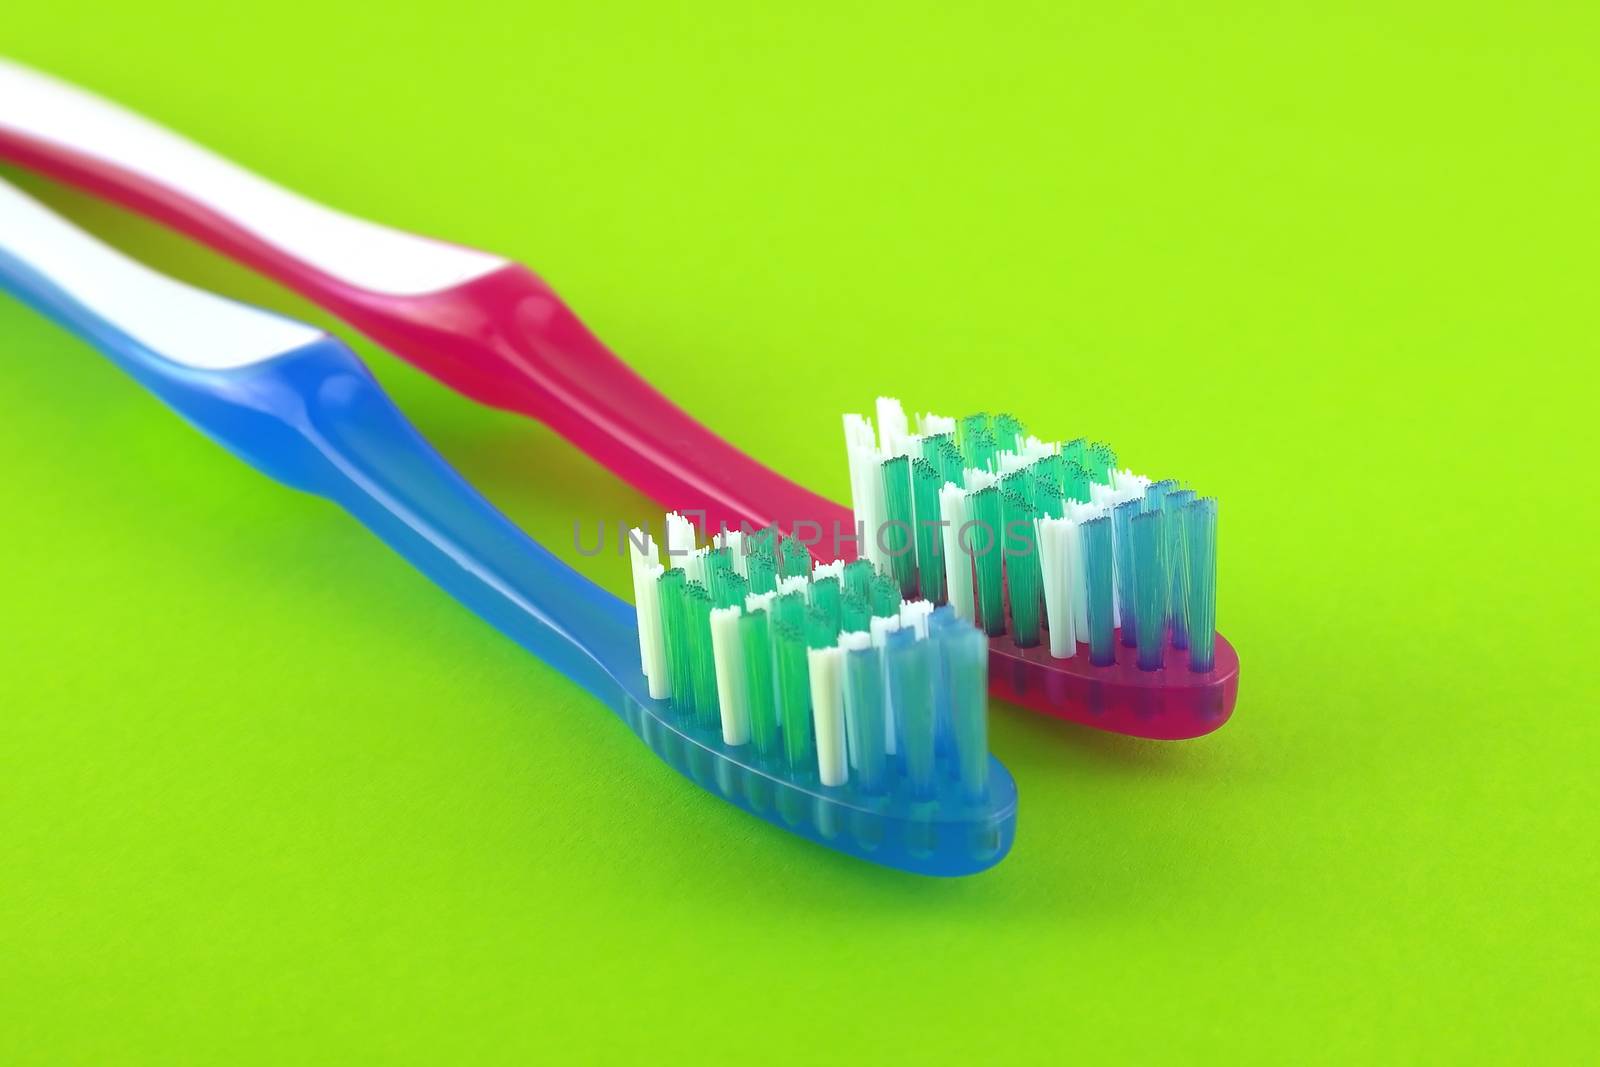 Two tooth-brushes over bright green